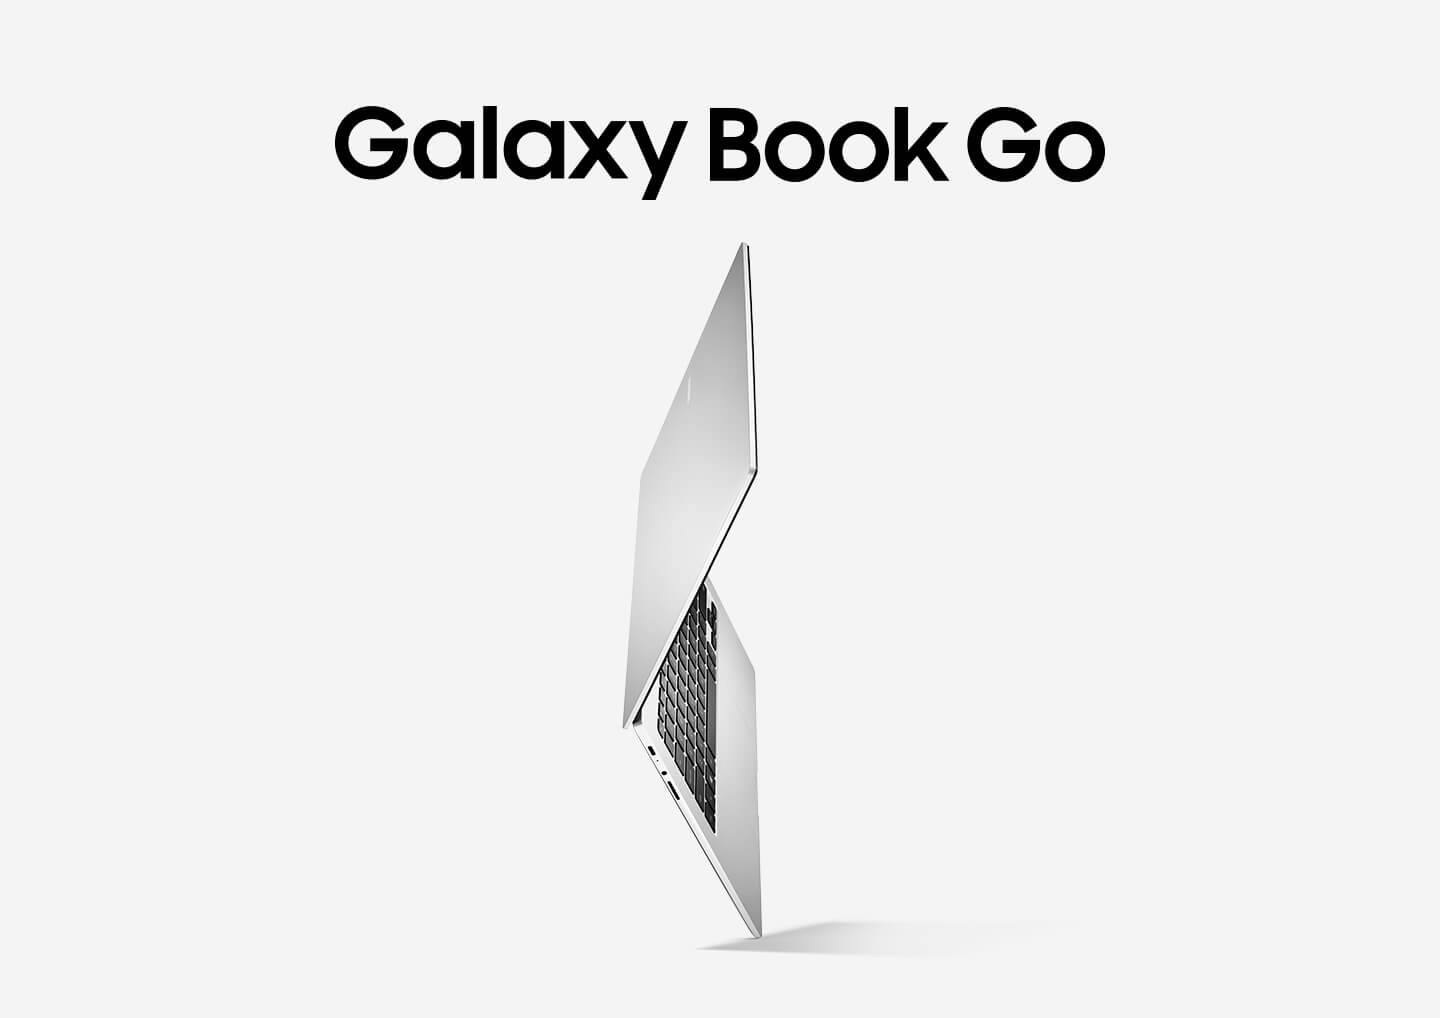 Galaxy Book Go seen unfolded and from the side, showing the exterior of the display half, and interior where the keyboard and touchpad are. It stands on a corner to demonstrate the lightweight form factor.